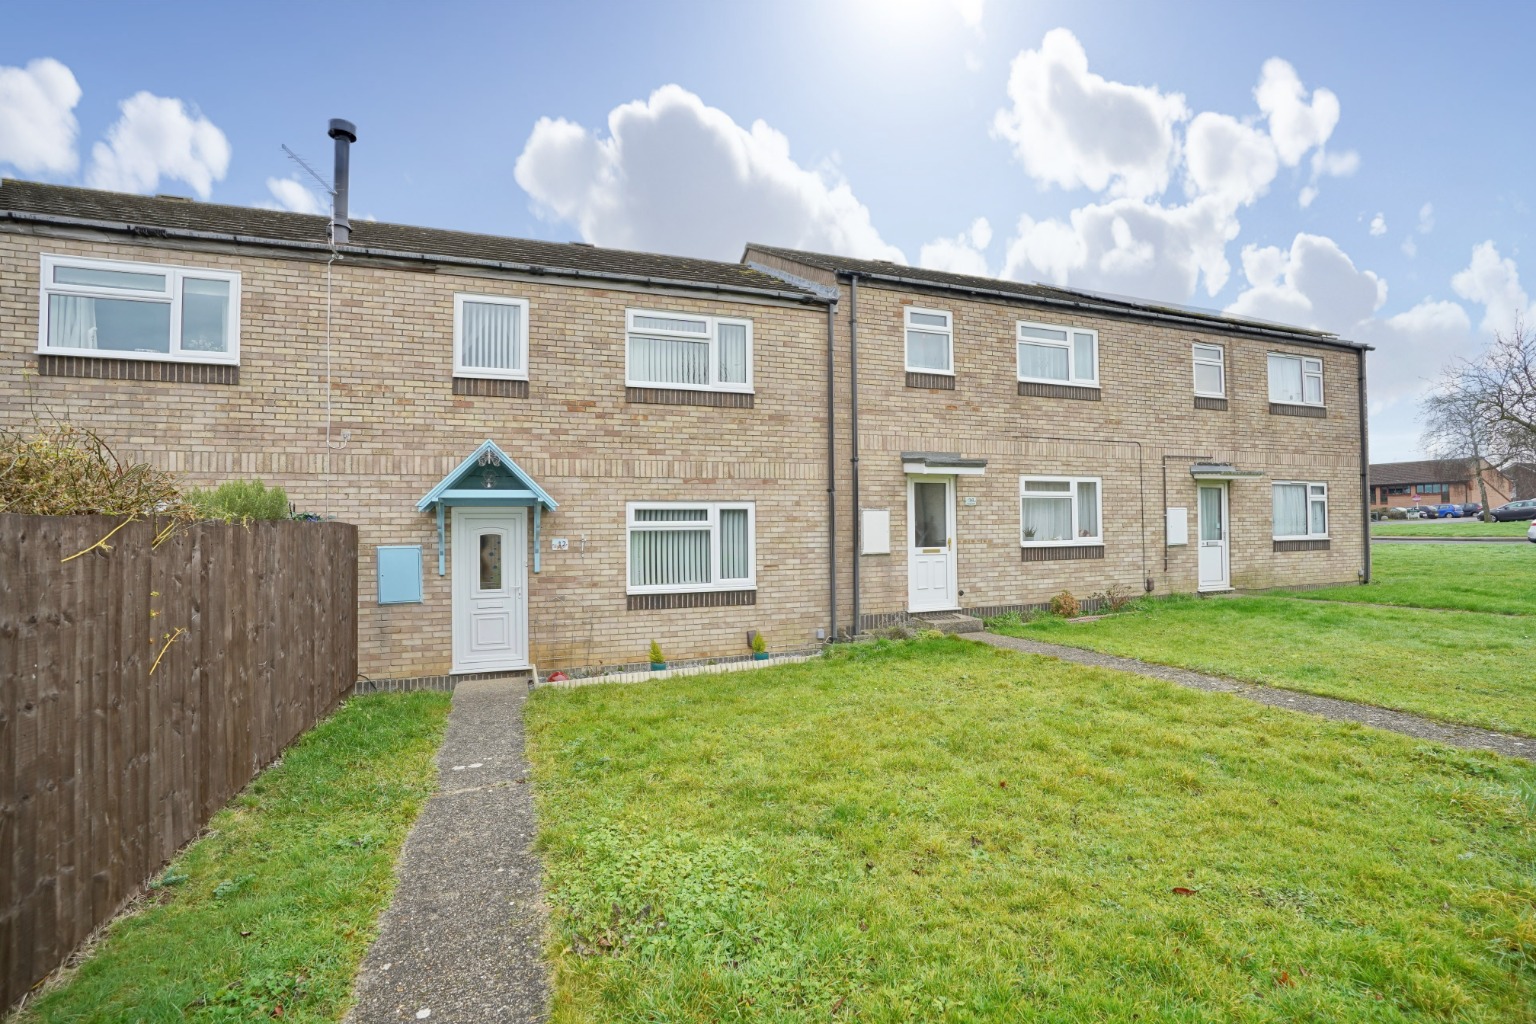 3 bed terraced house for sale in Drings Close, Cambridge - Property Image 1